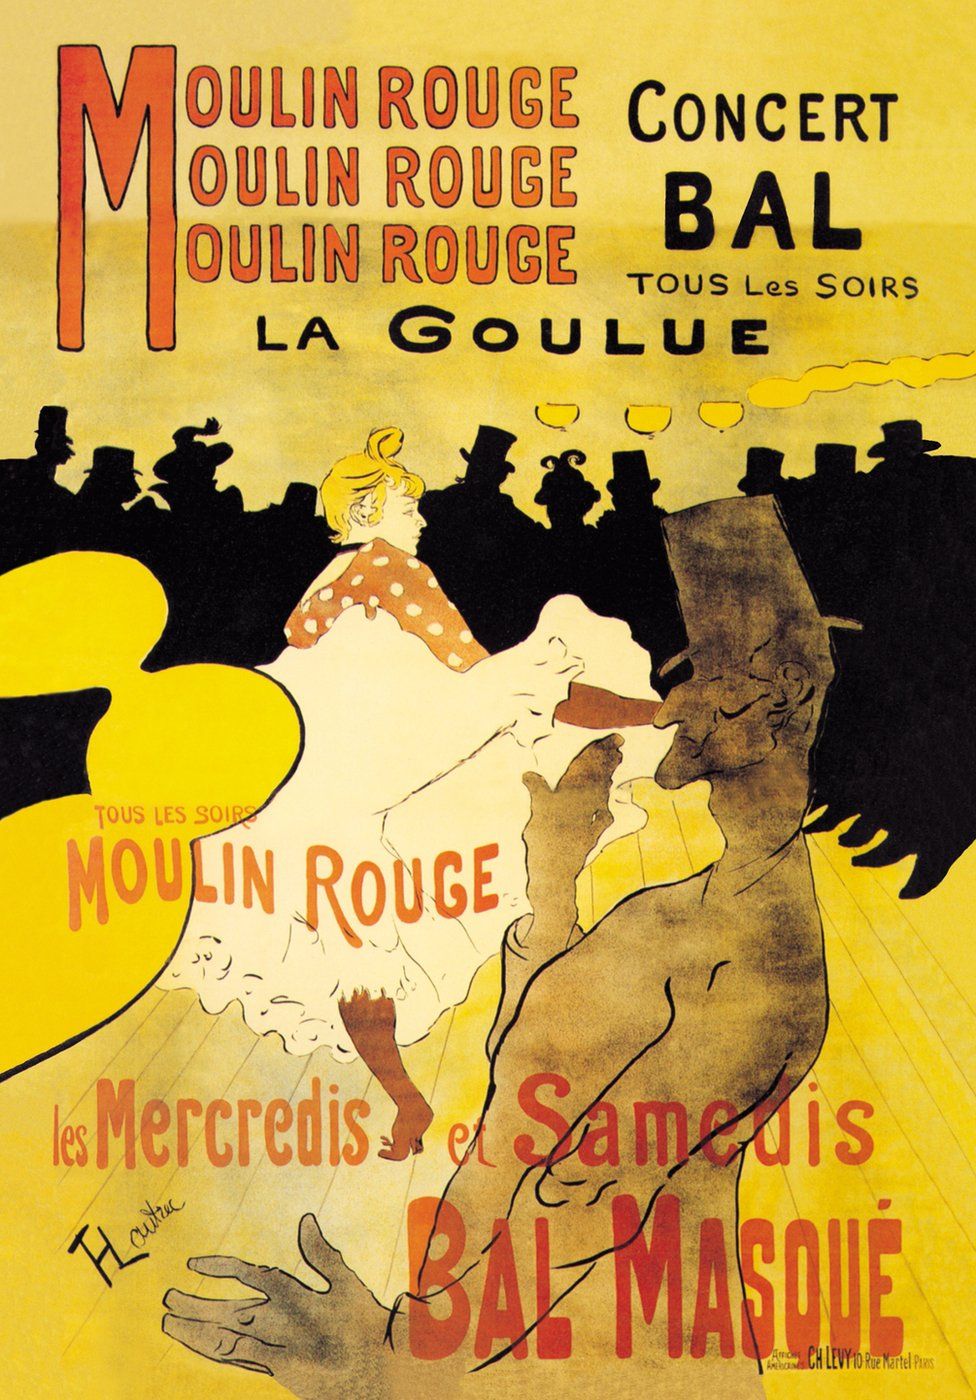 A painting by Toulouse-Lautrec featuring a Moulin Rouge dancer